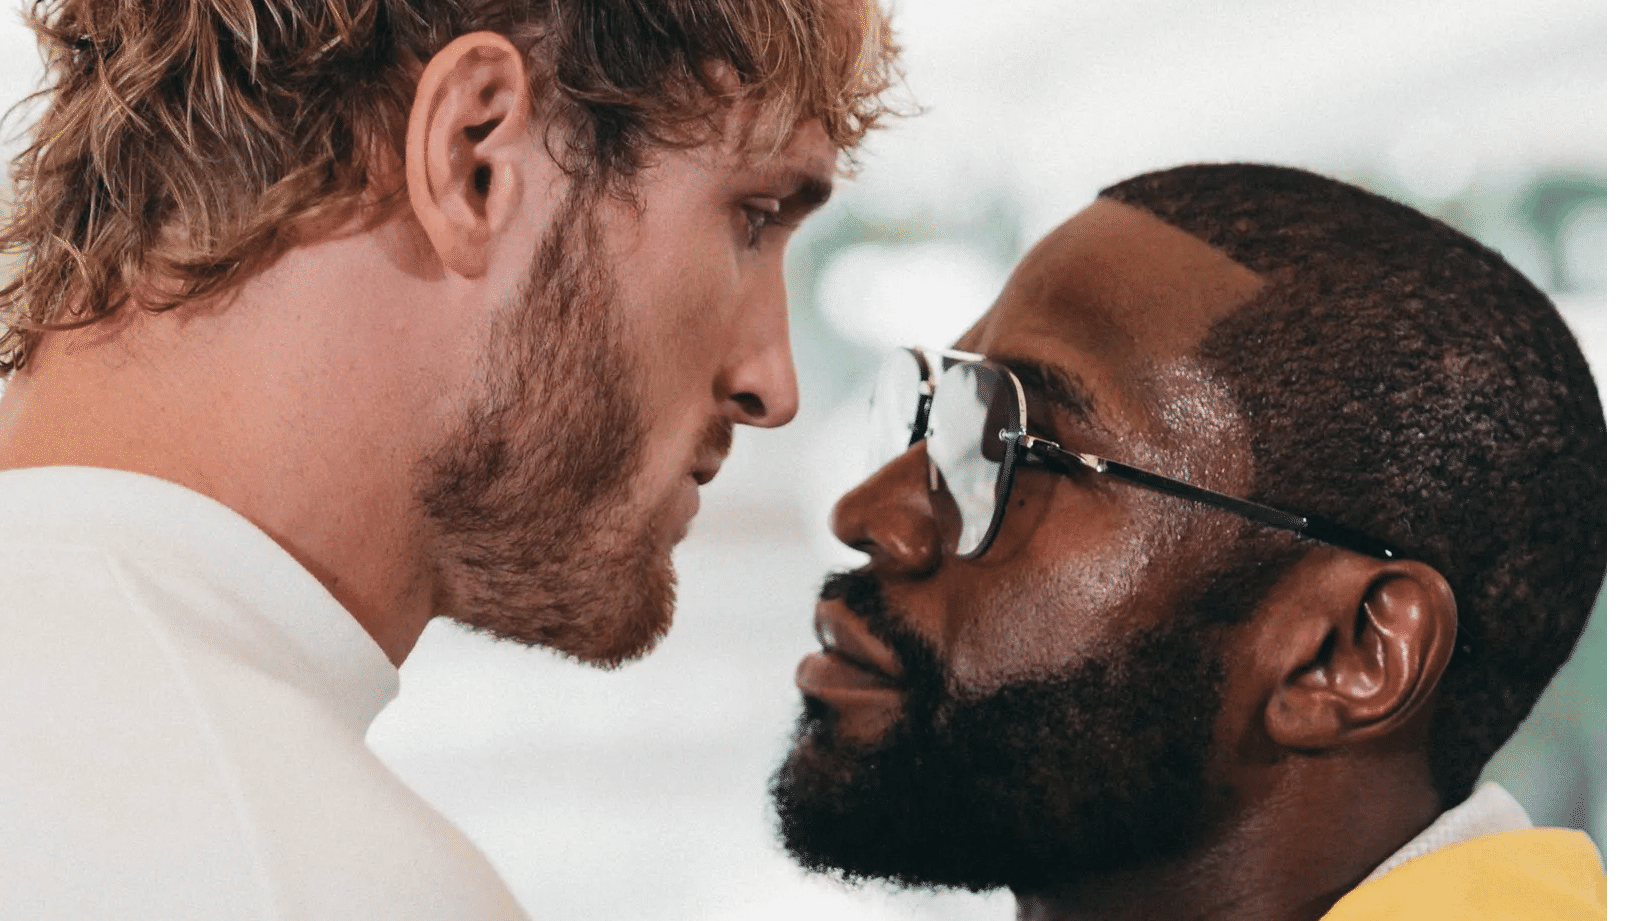 Floyd Mayweather vs Logan Paul: All you need to know about the boxing match